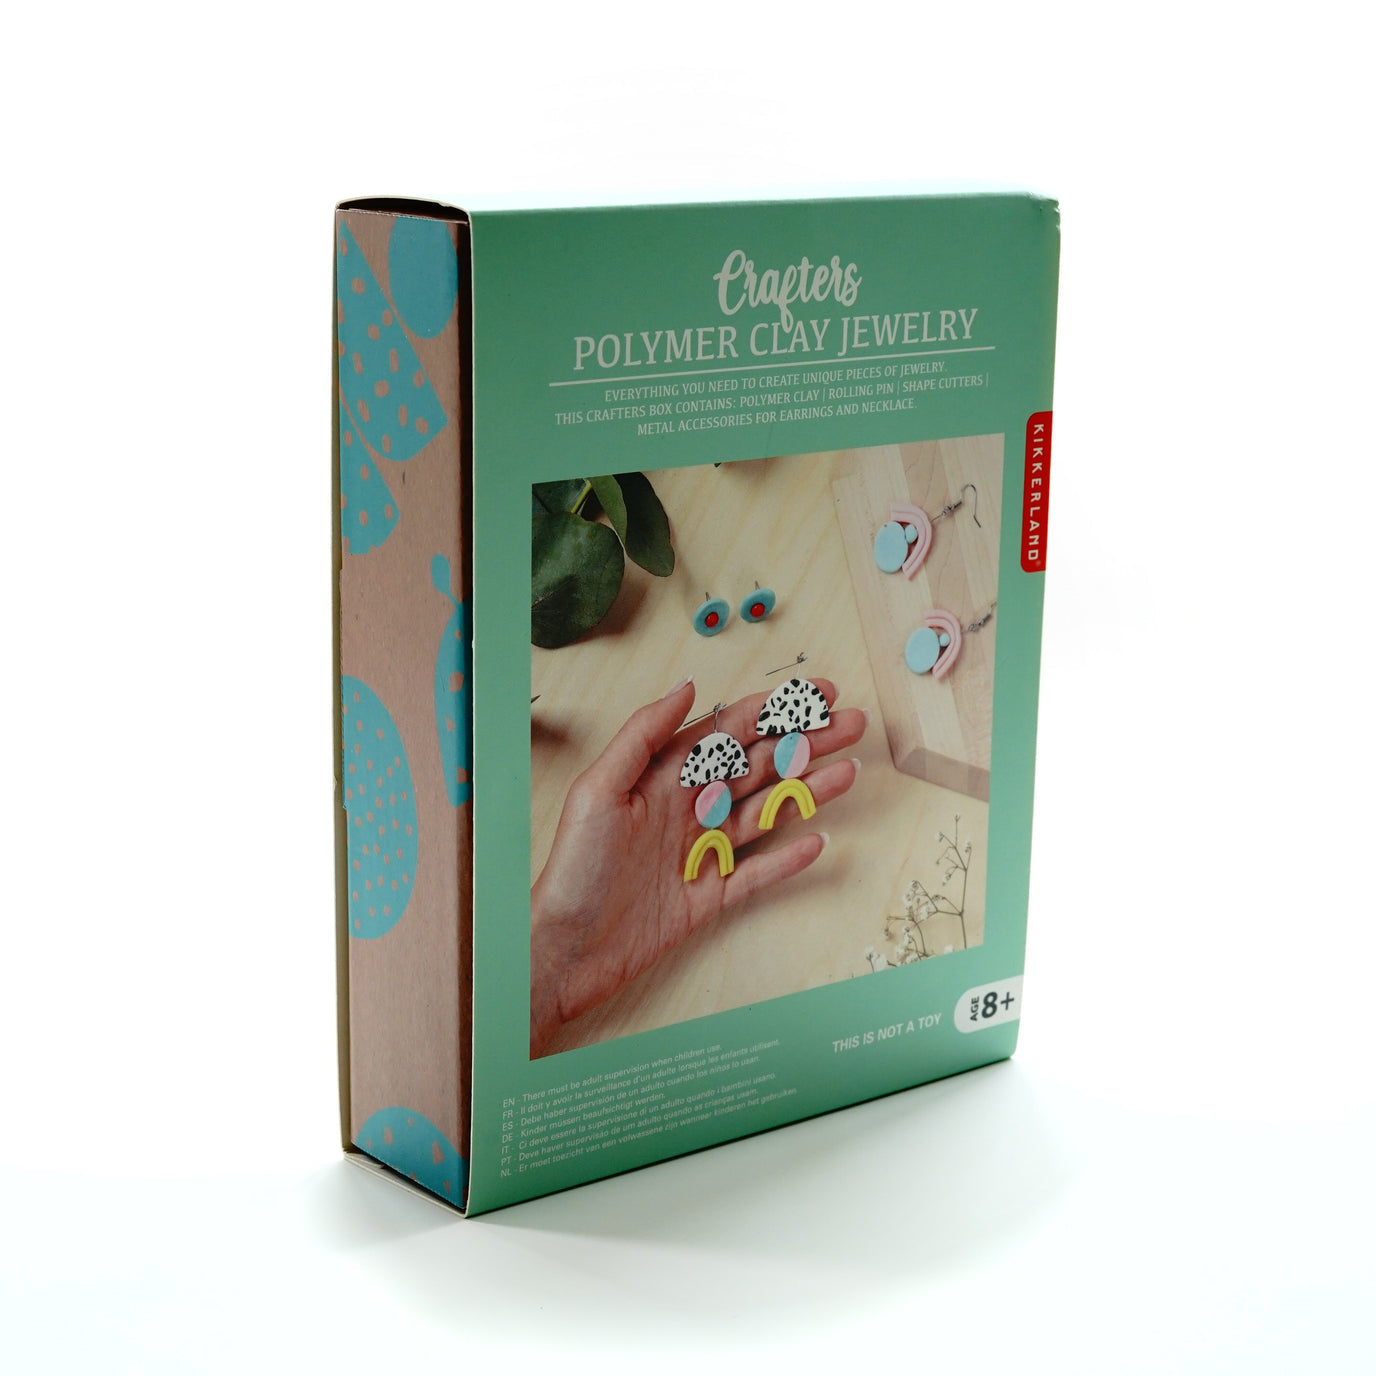 Crafters Polymer Clay Jewelry Kit